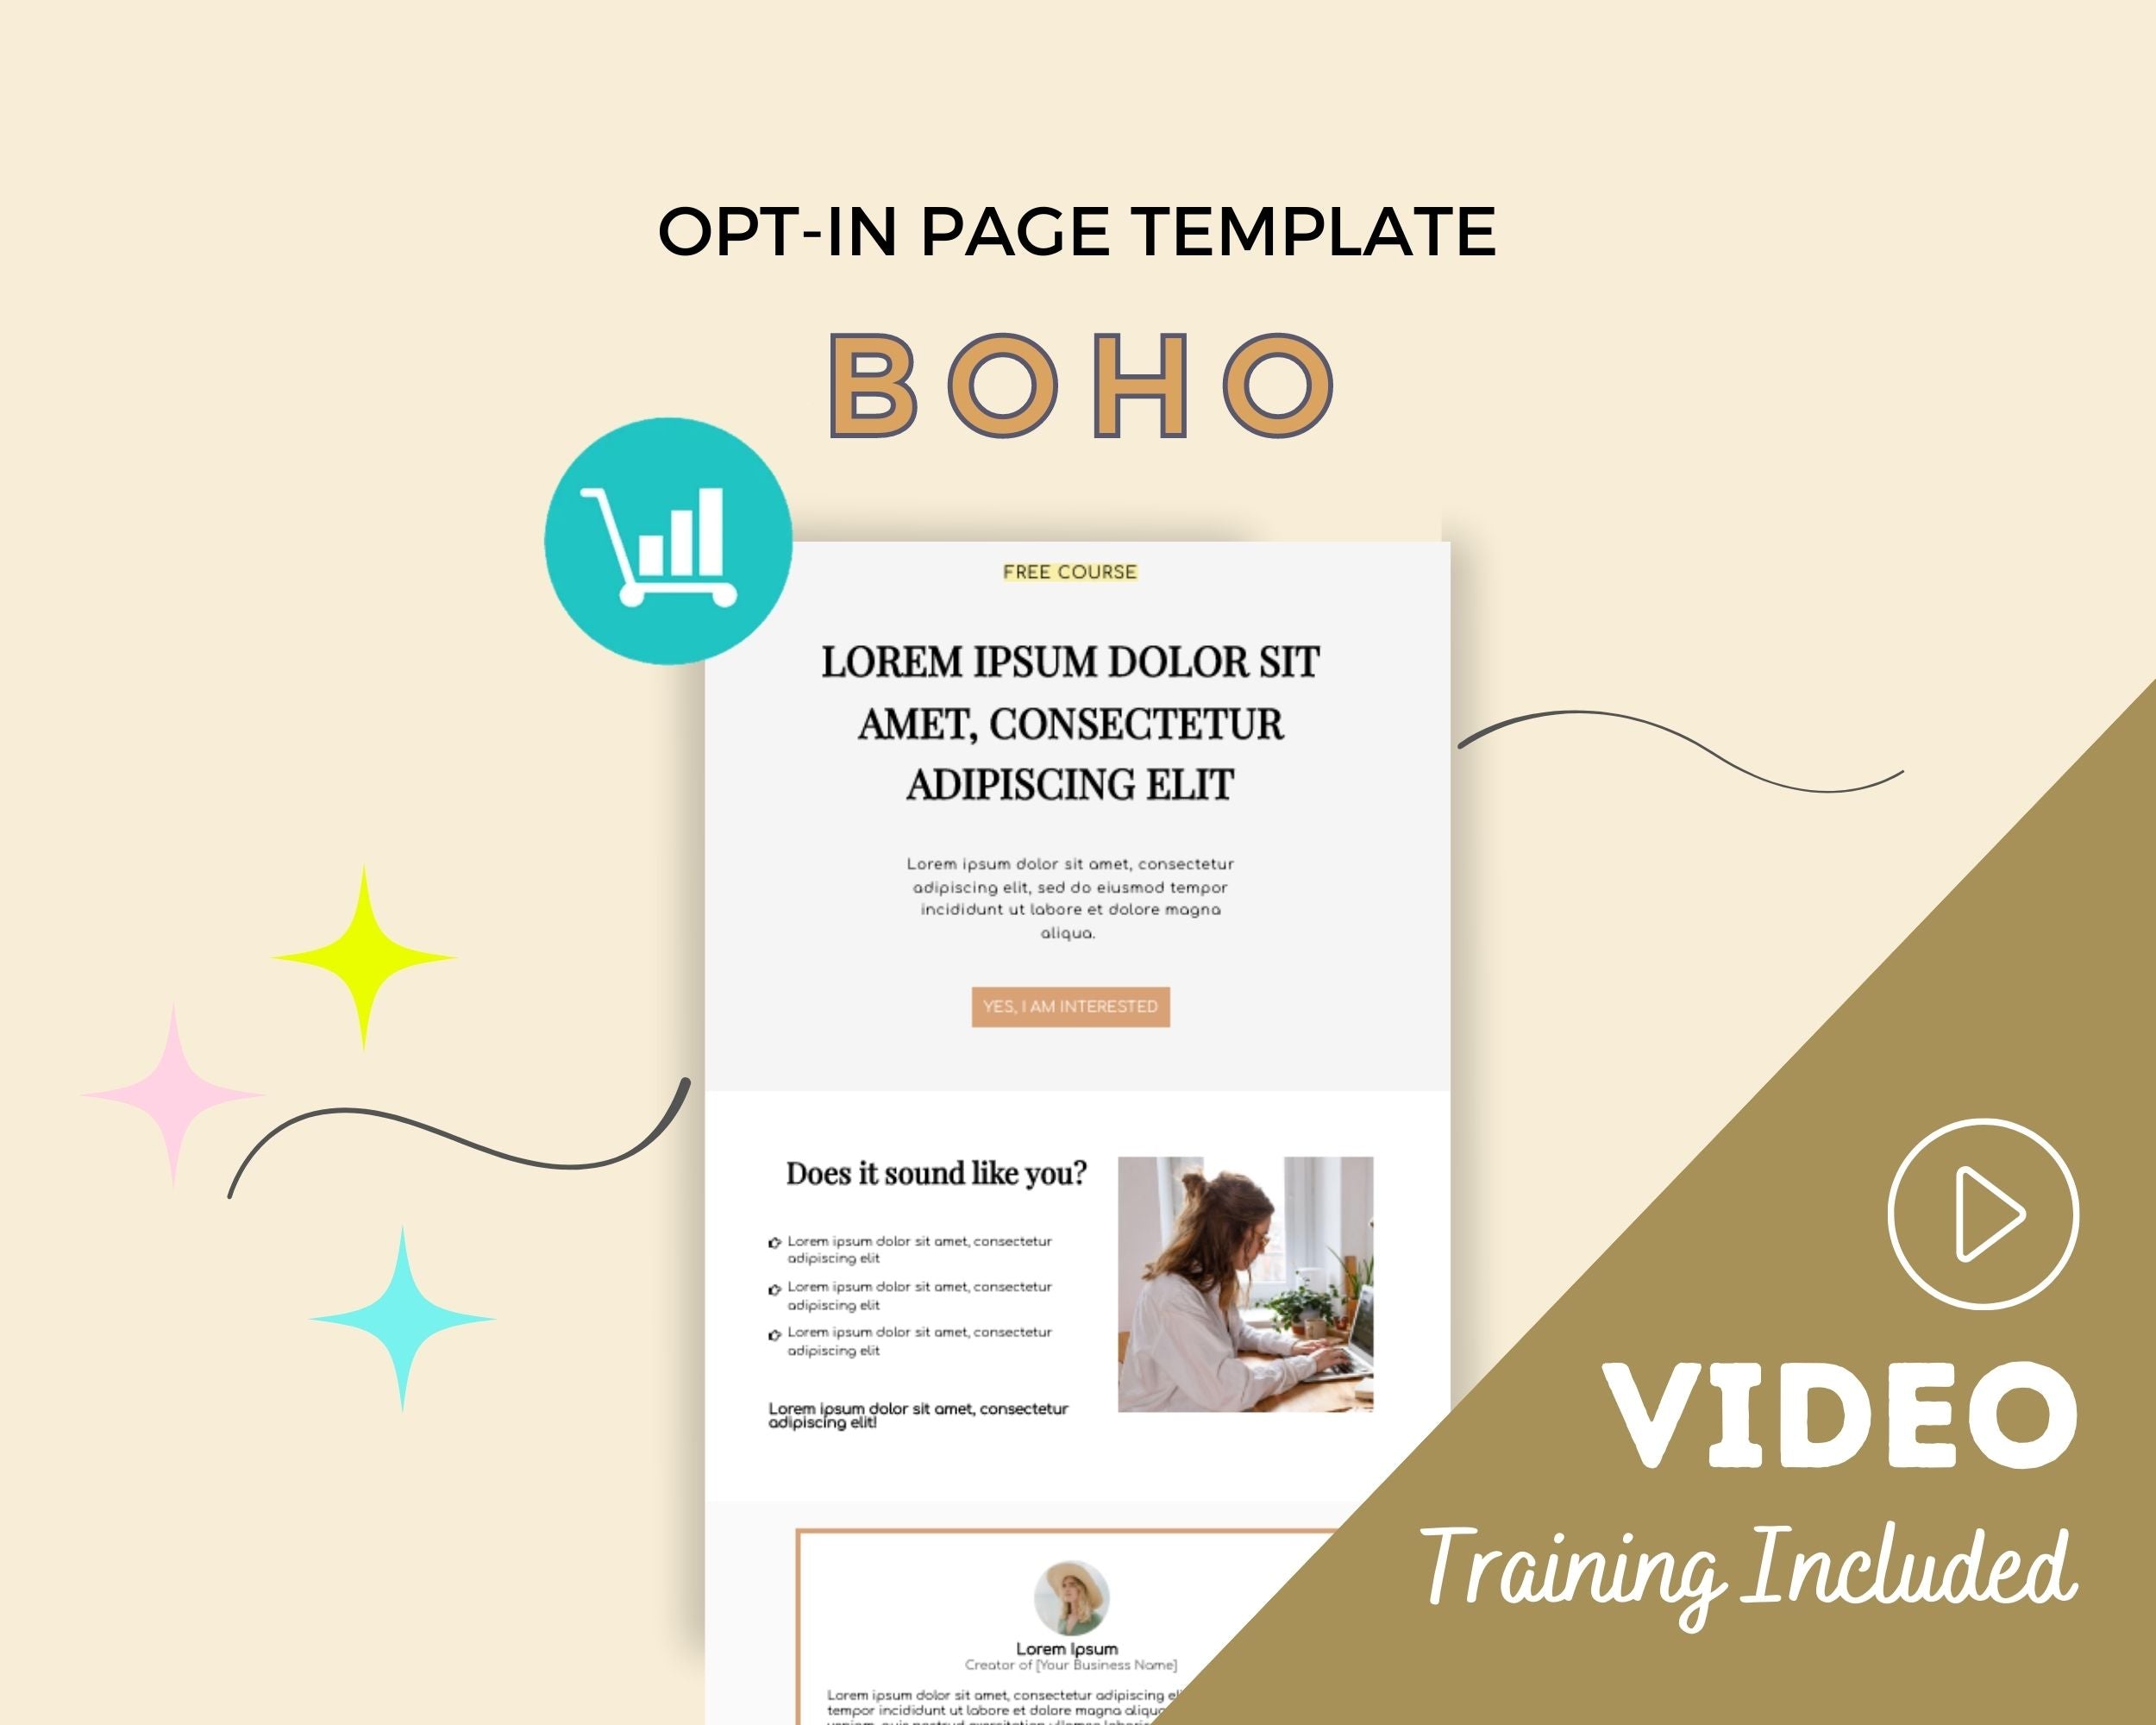 Boho ThriveCart Opt In Page Template